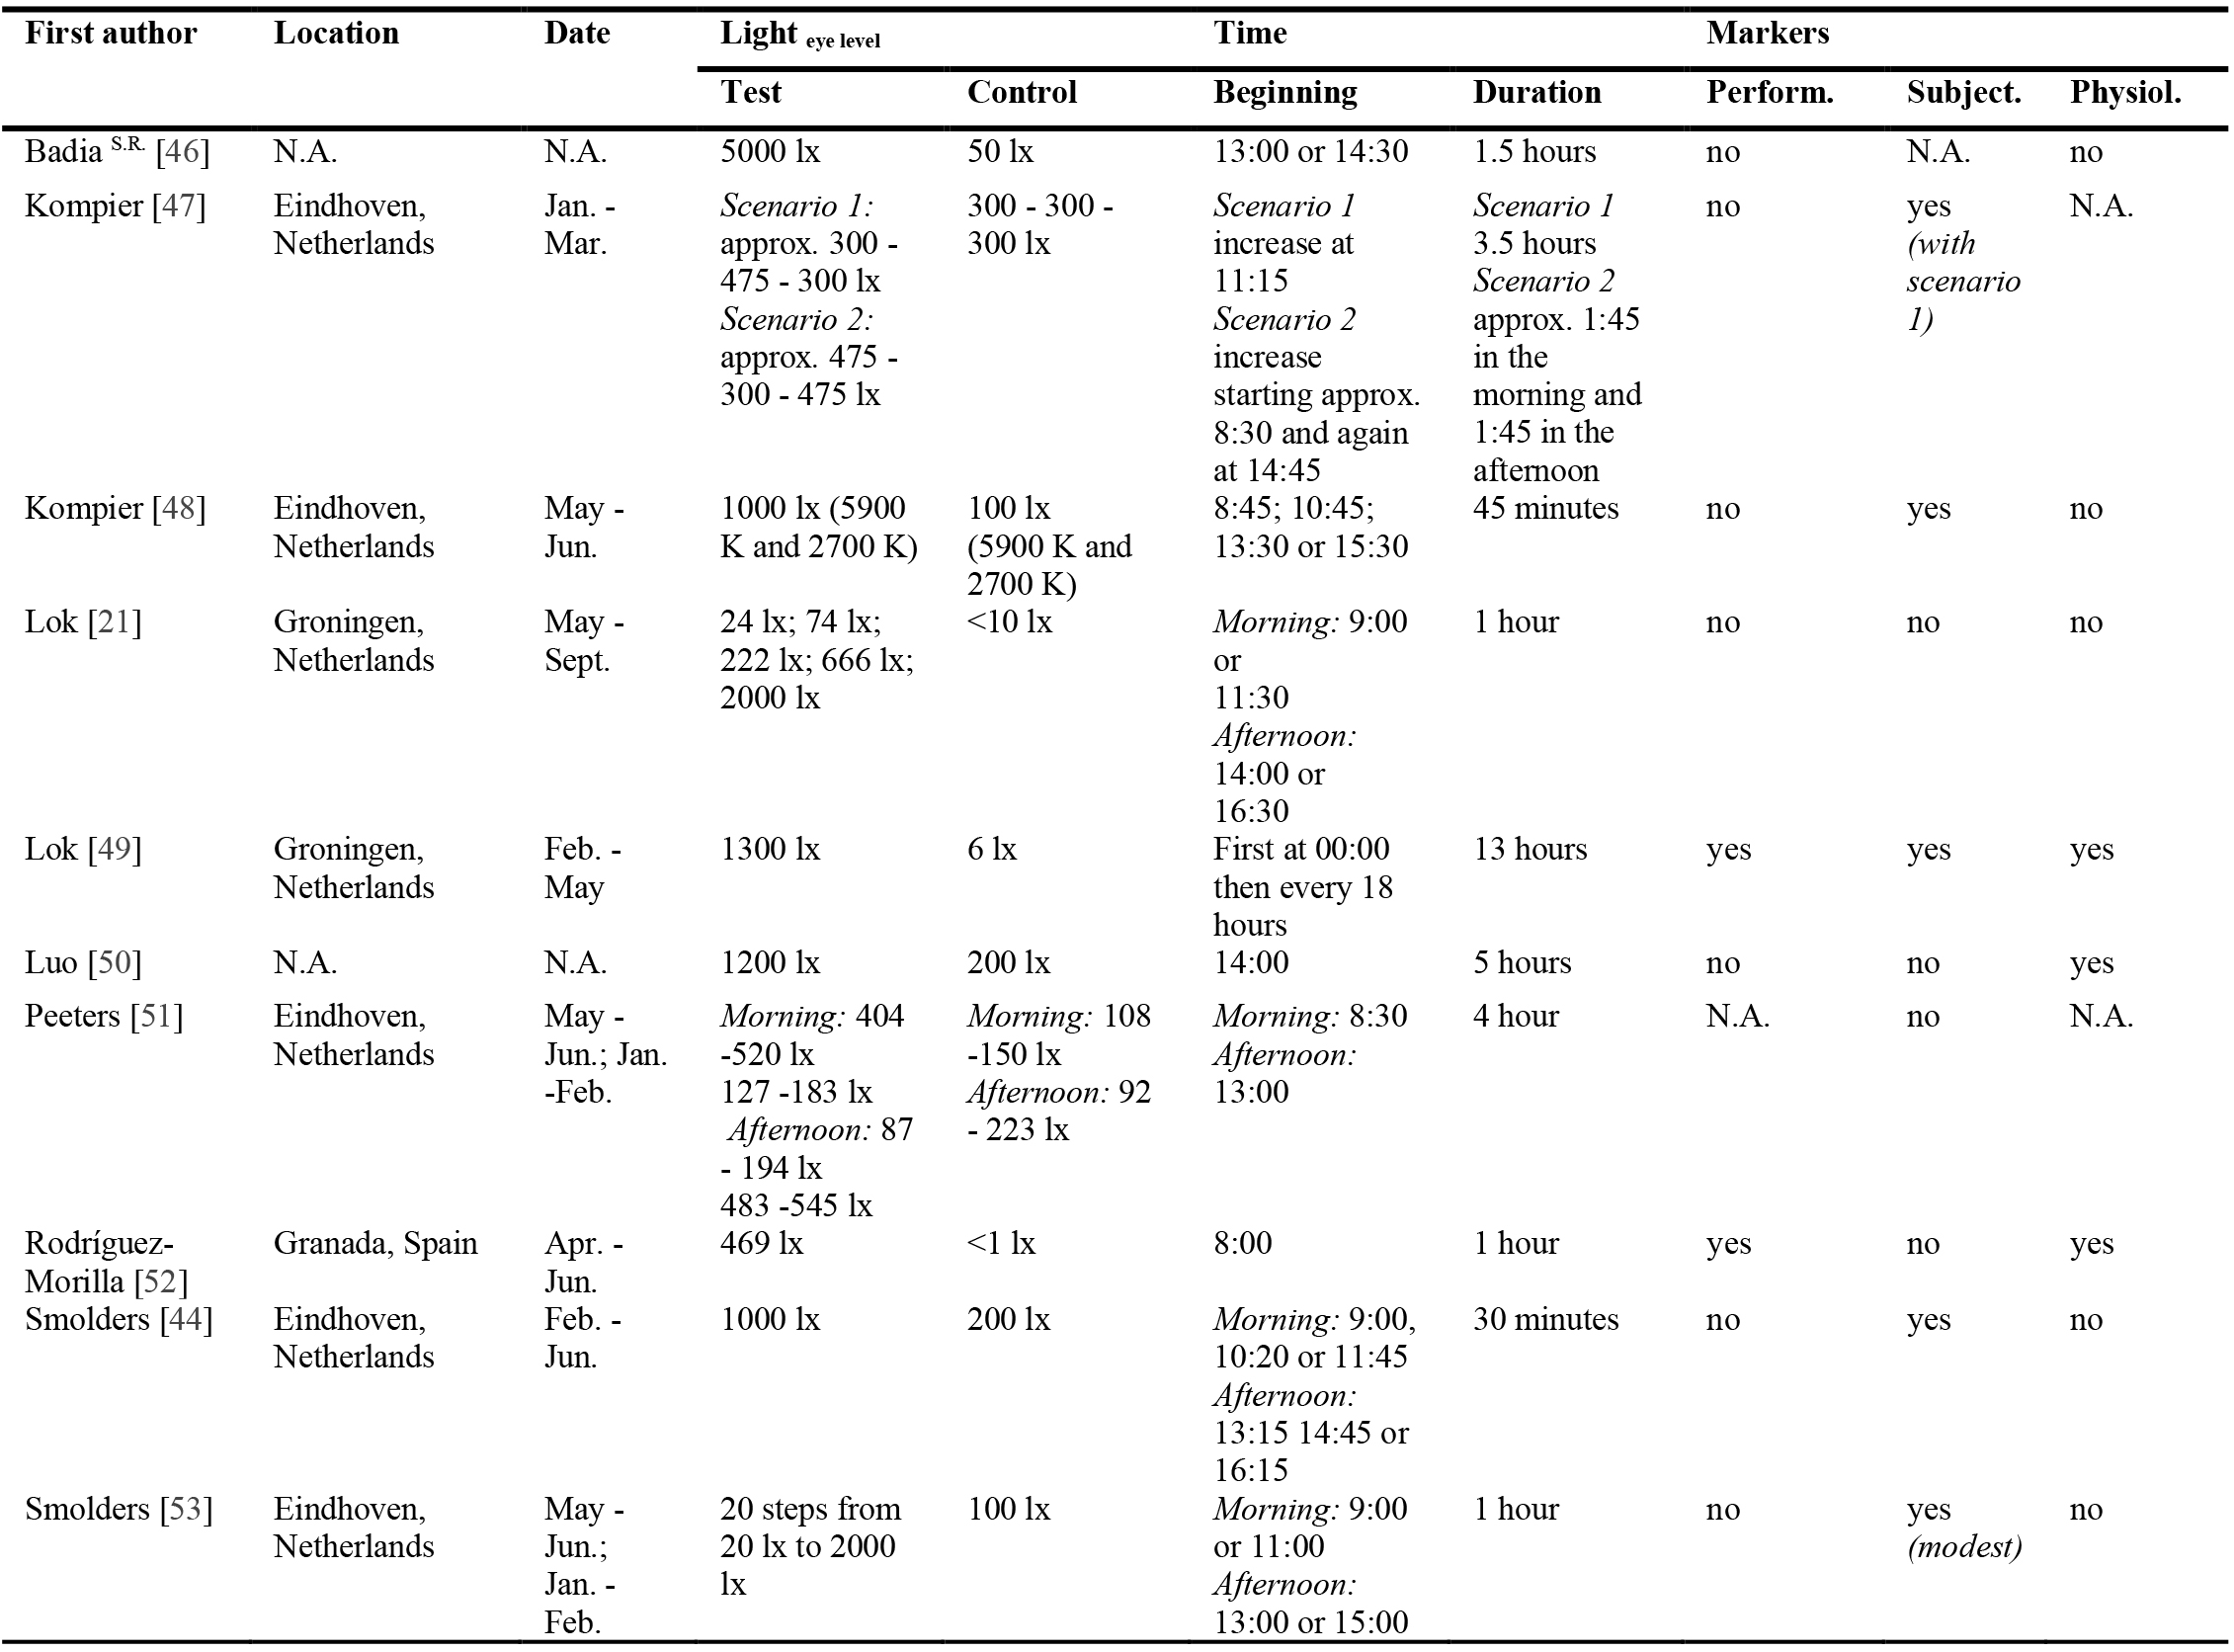 Overview of the publications that investigate the impact of illuminance. S.R. = sleep restriction.